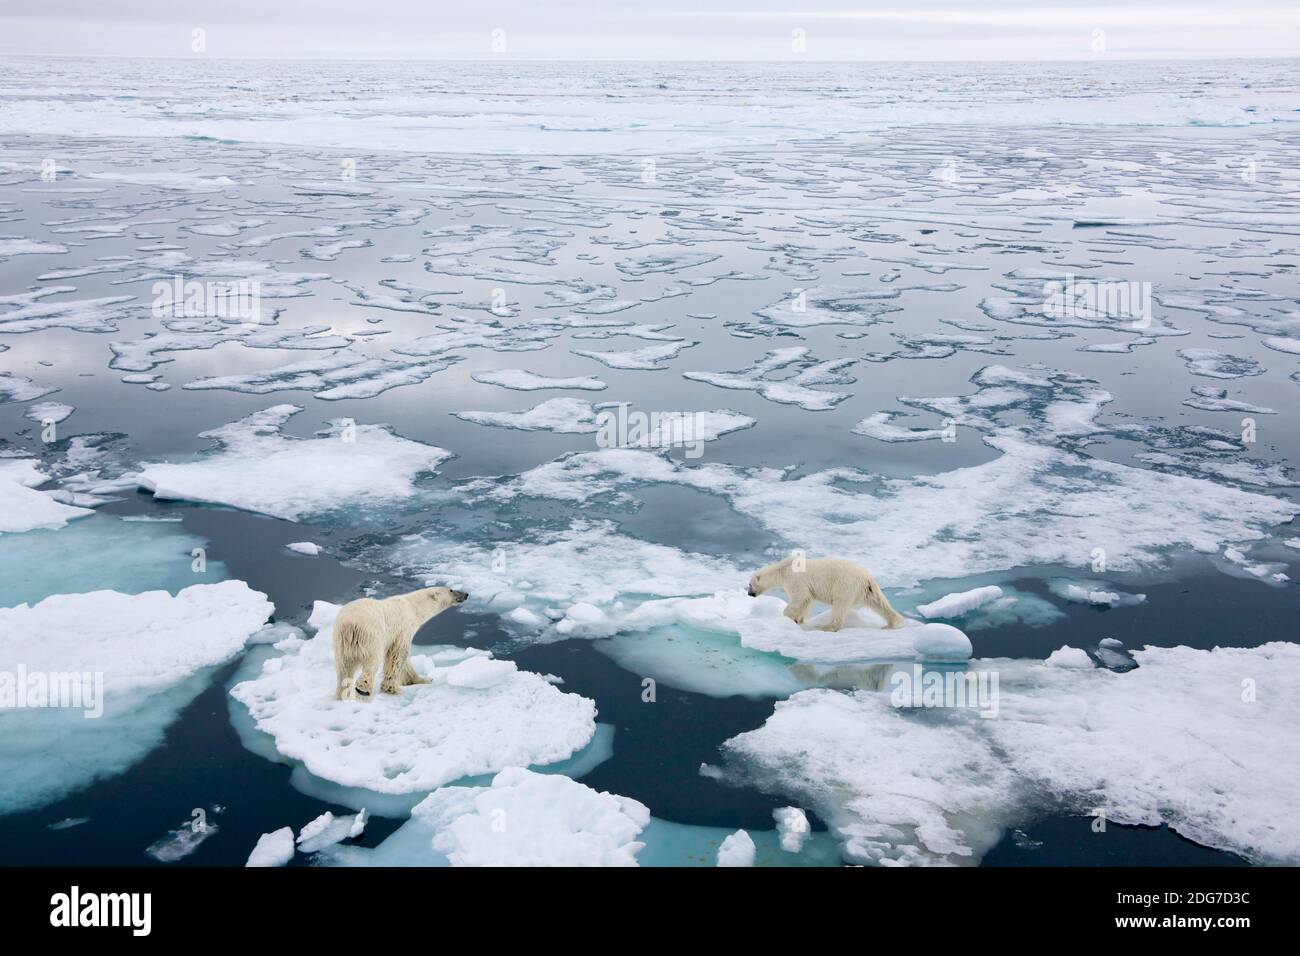 Two Polar Bears on floating ice in the Arctic Ocean, Spitsbergen, Norway Stock Photo